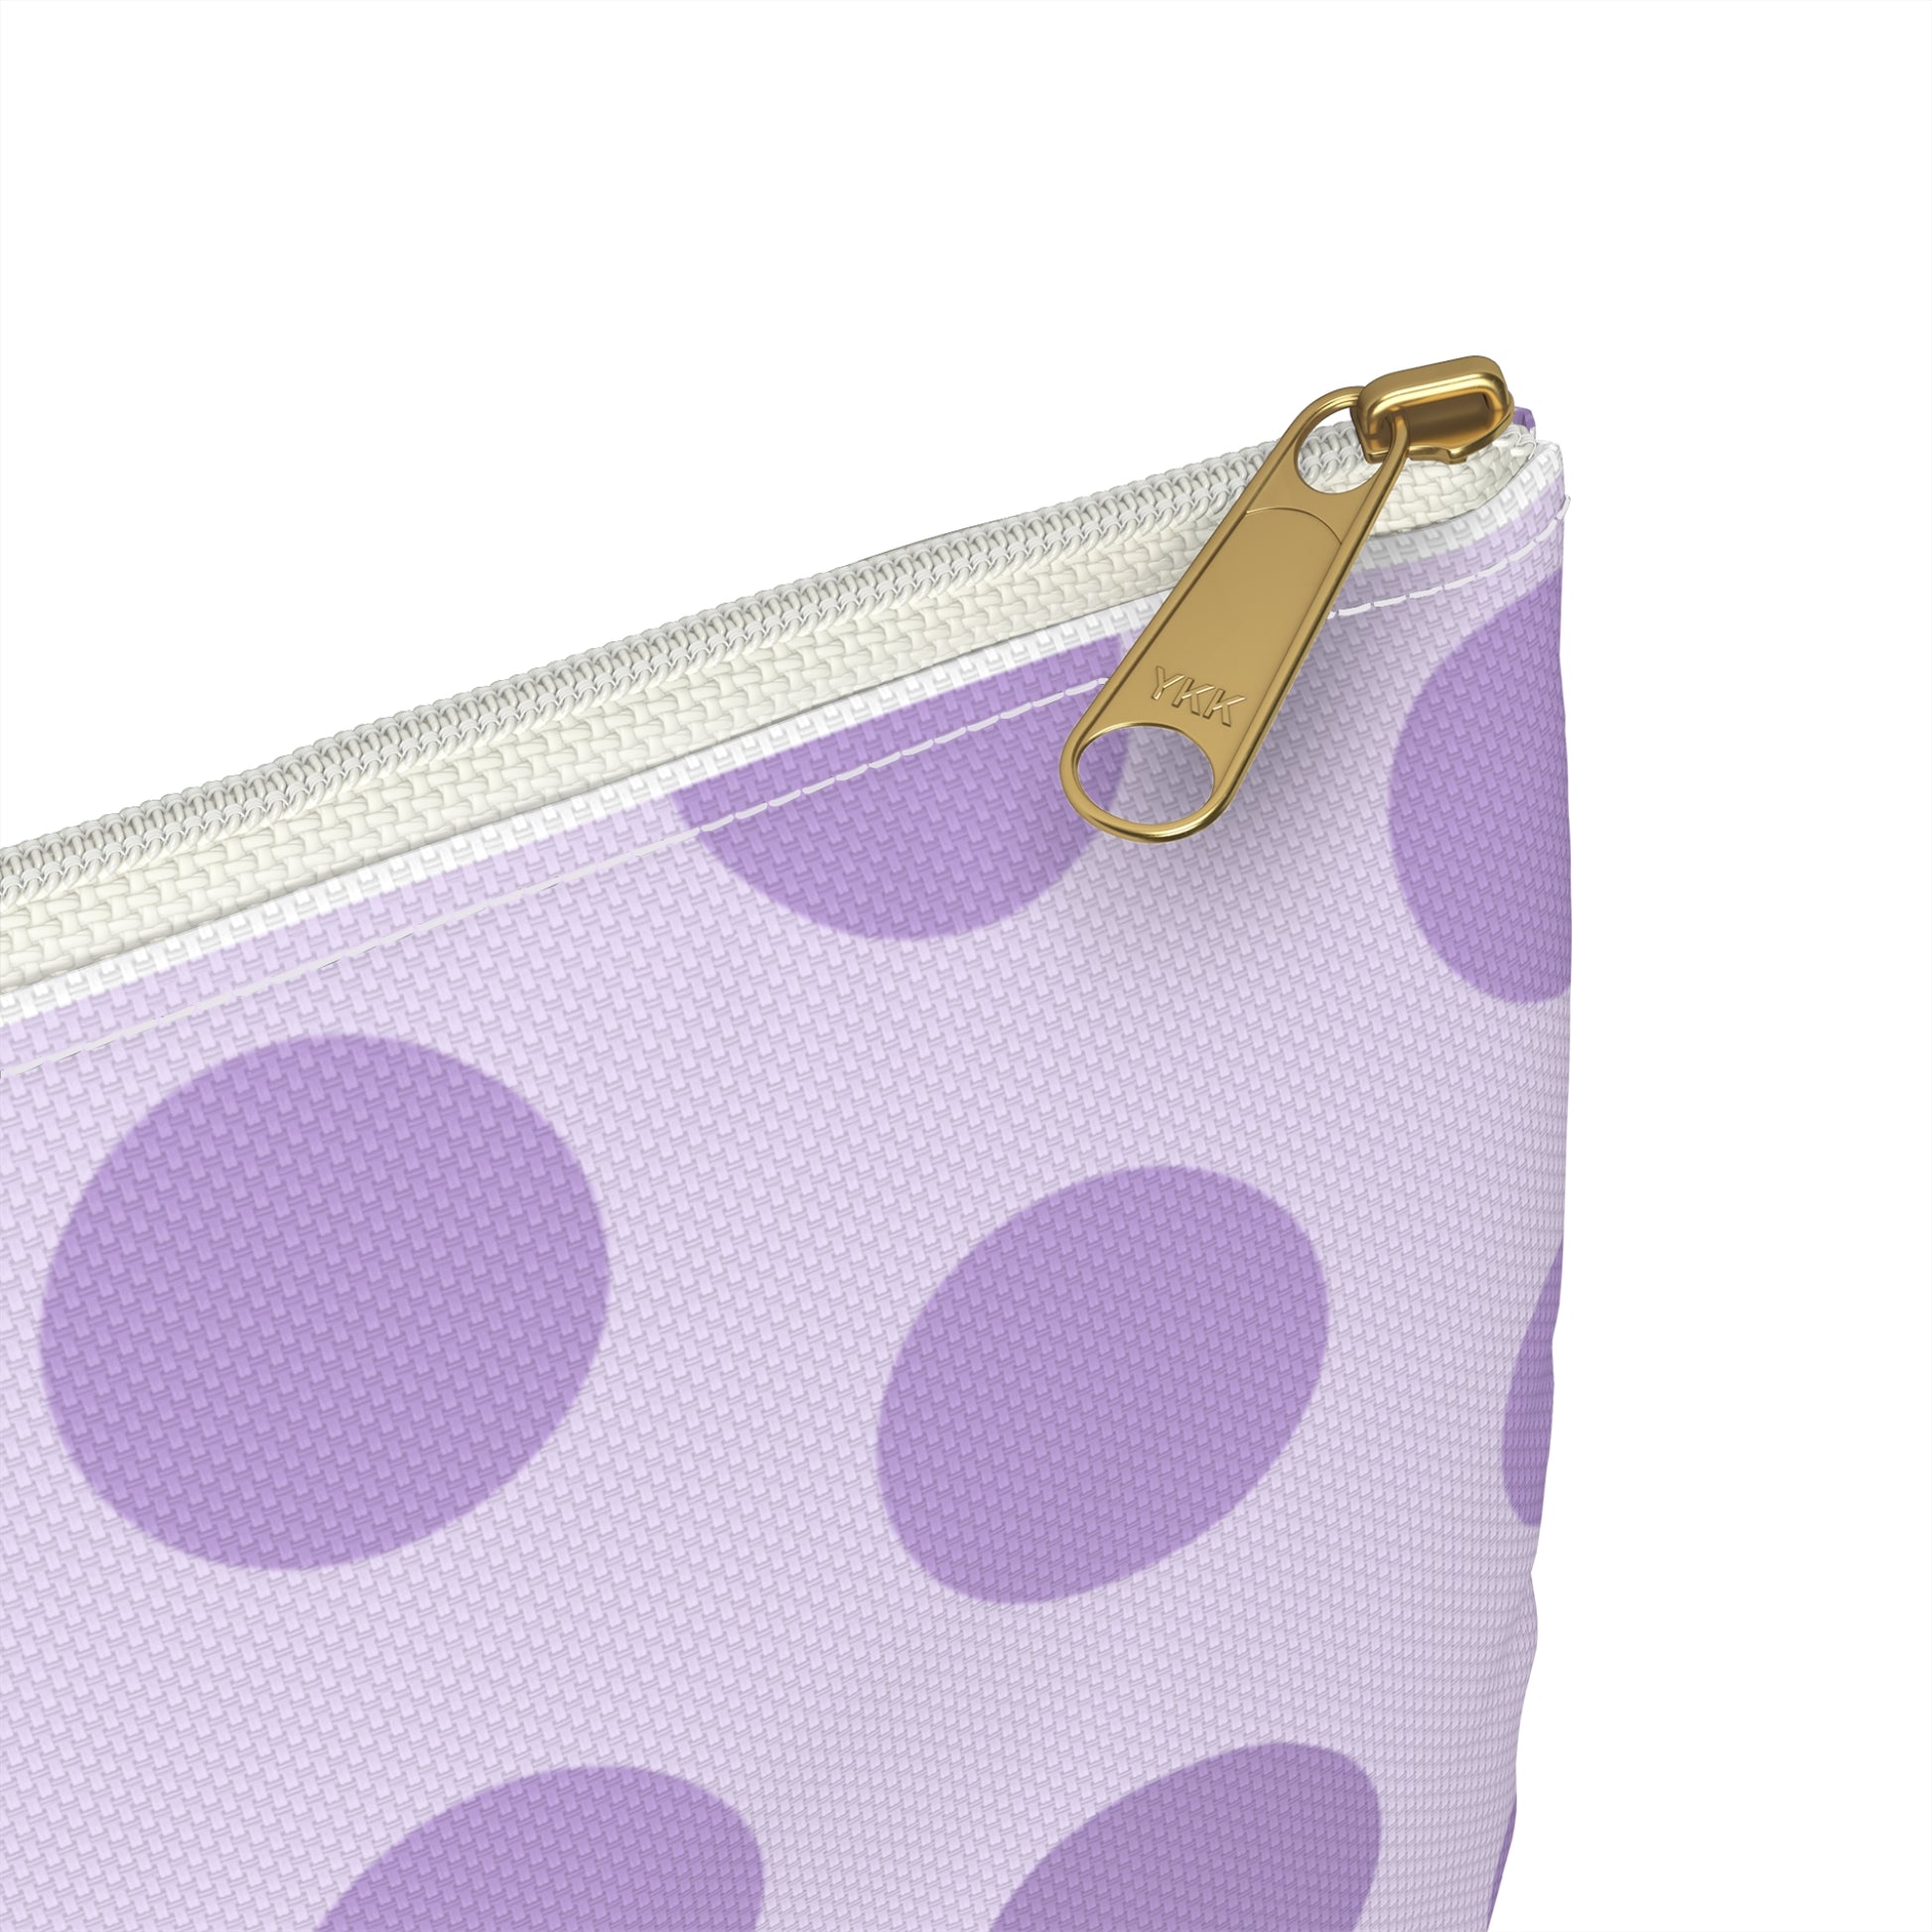 a purple and white polka dot purse with a gold hook